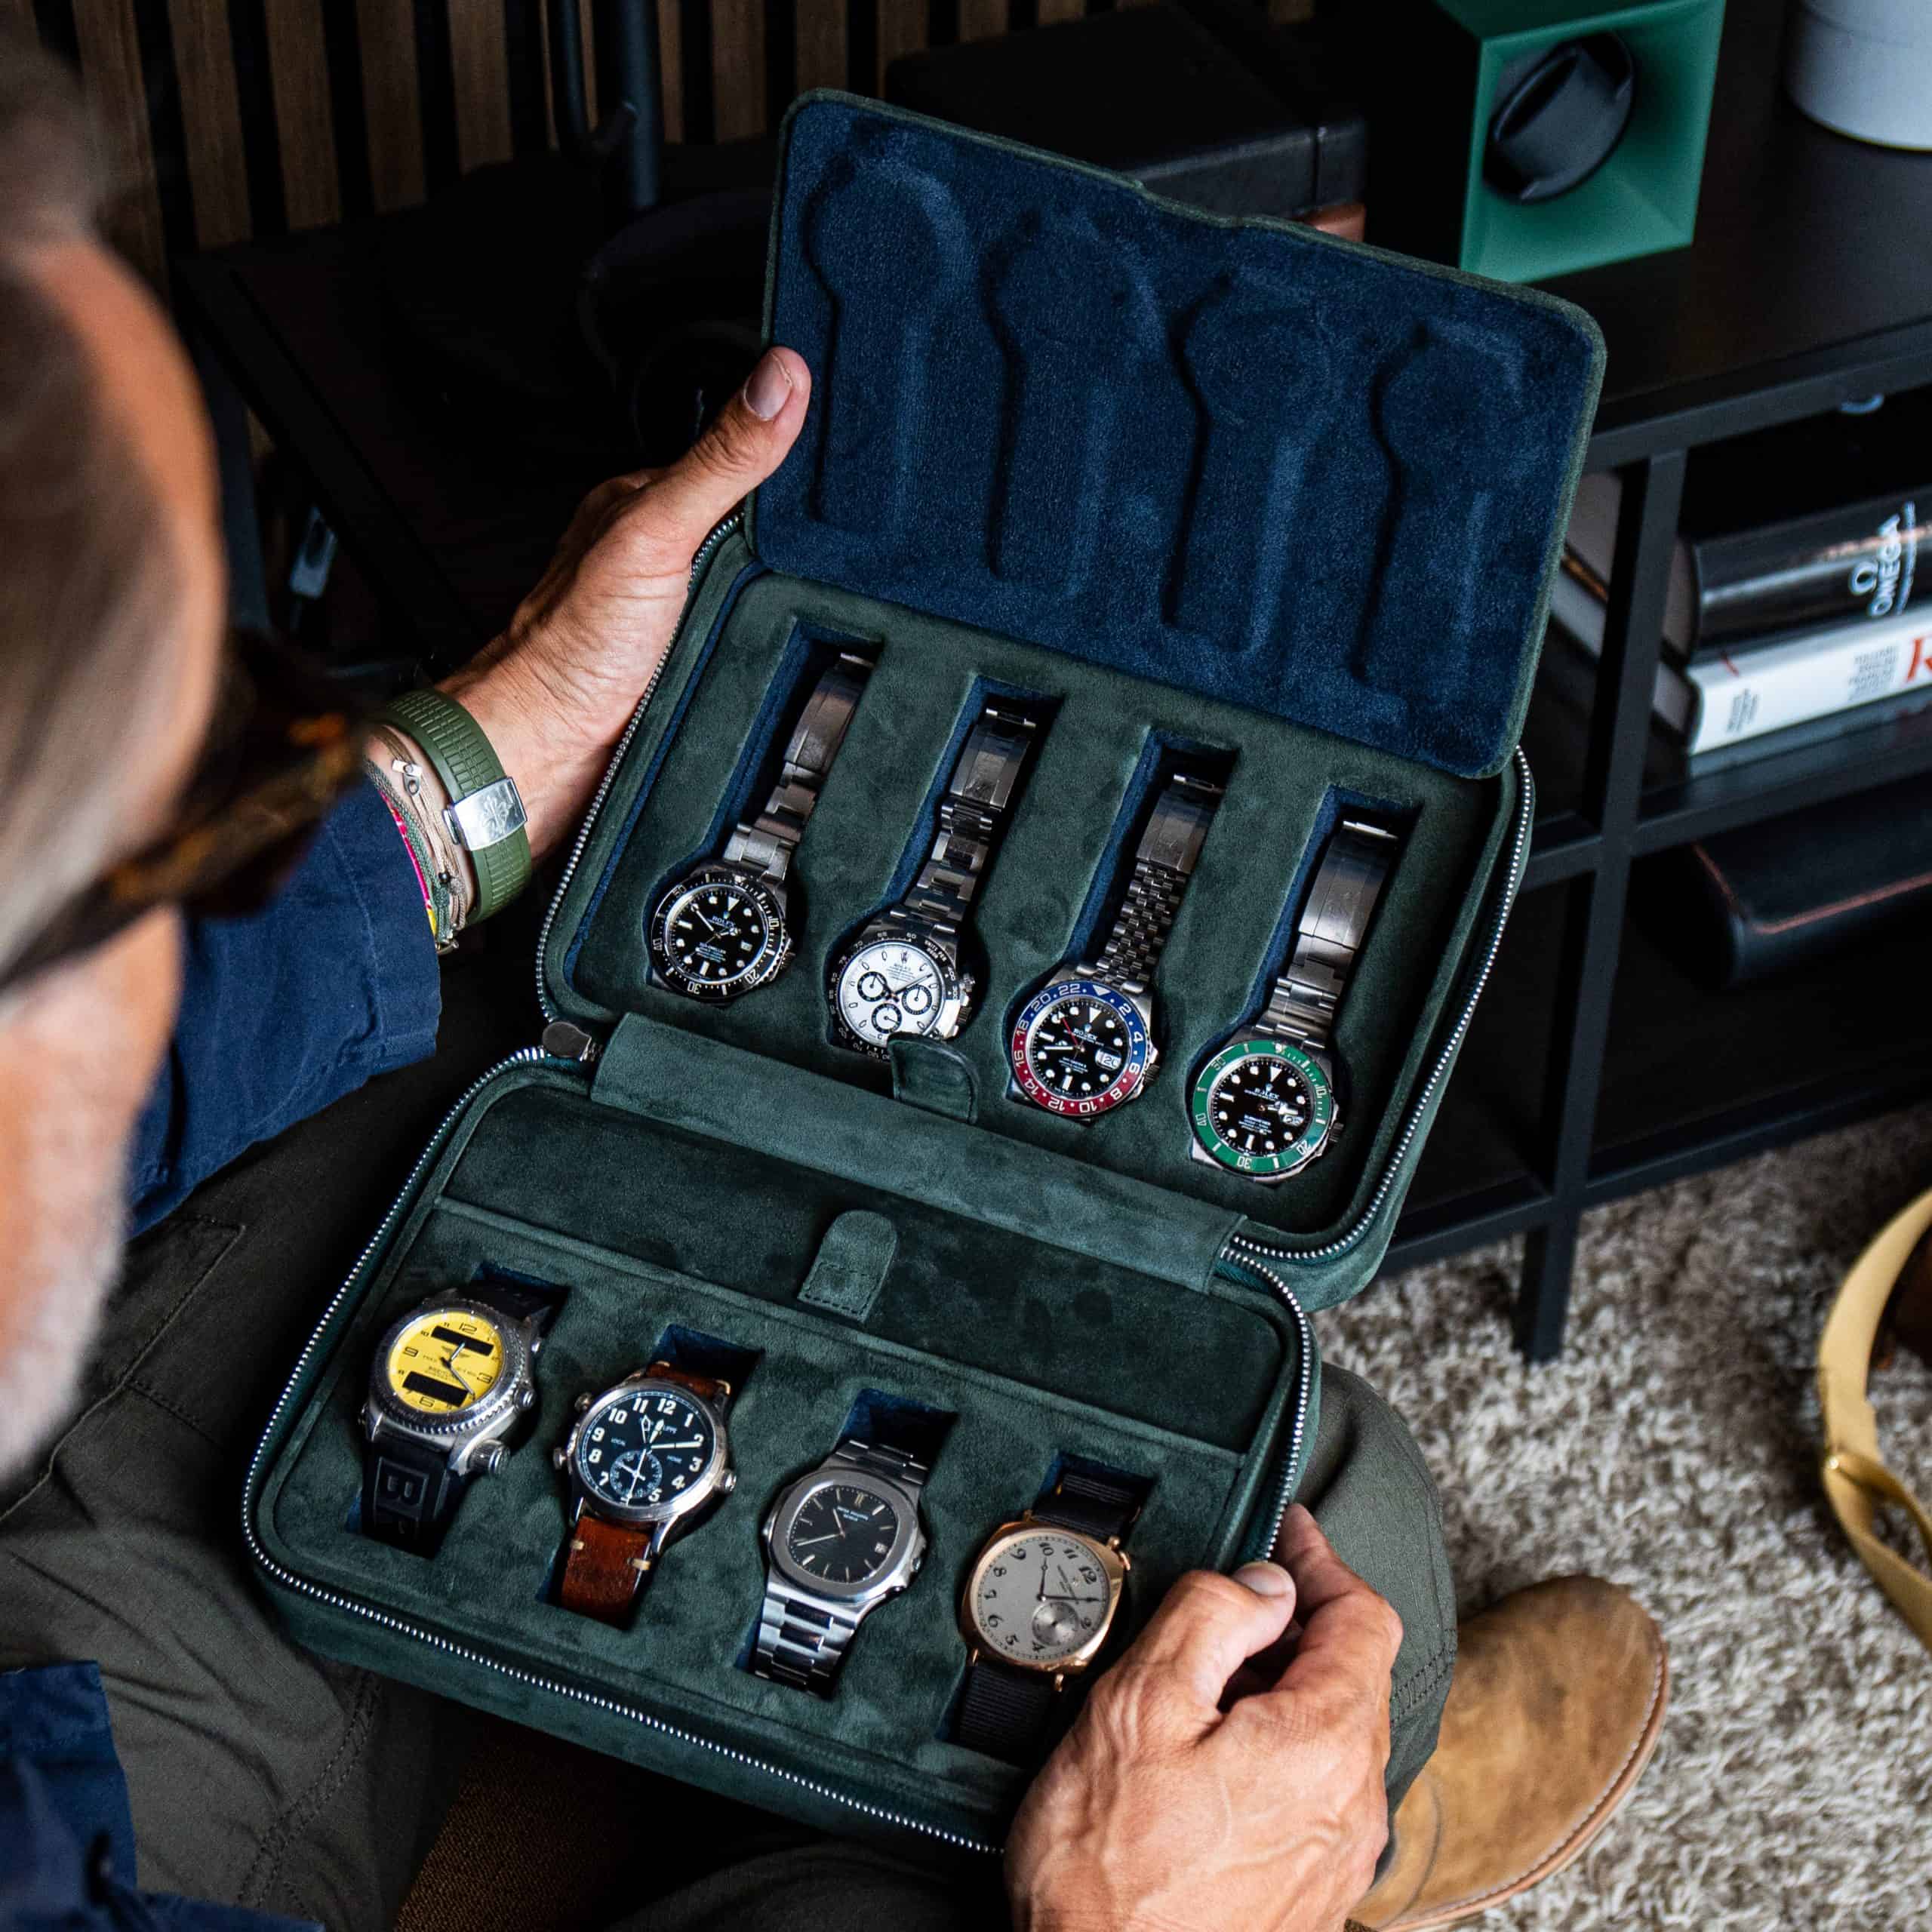 Forest Green 8 Slot Watch Box - $899 - Free shipping